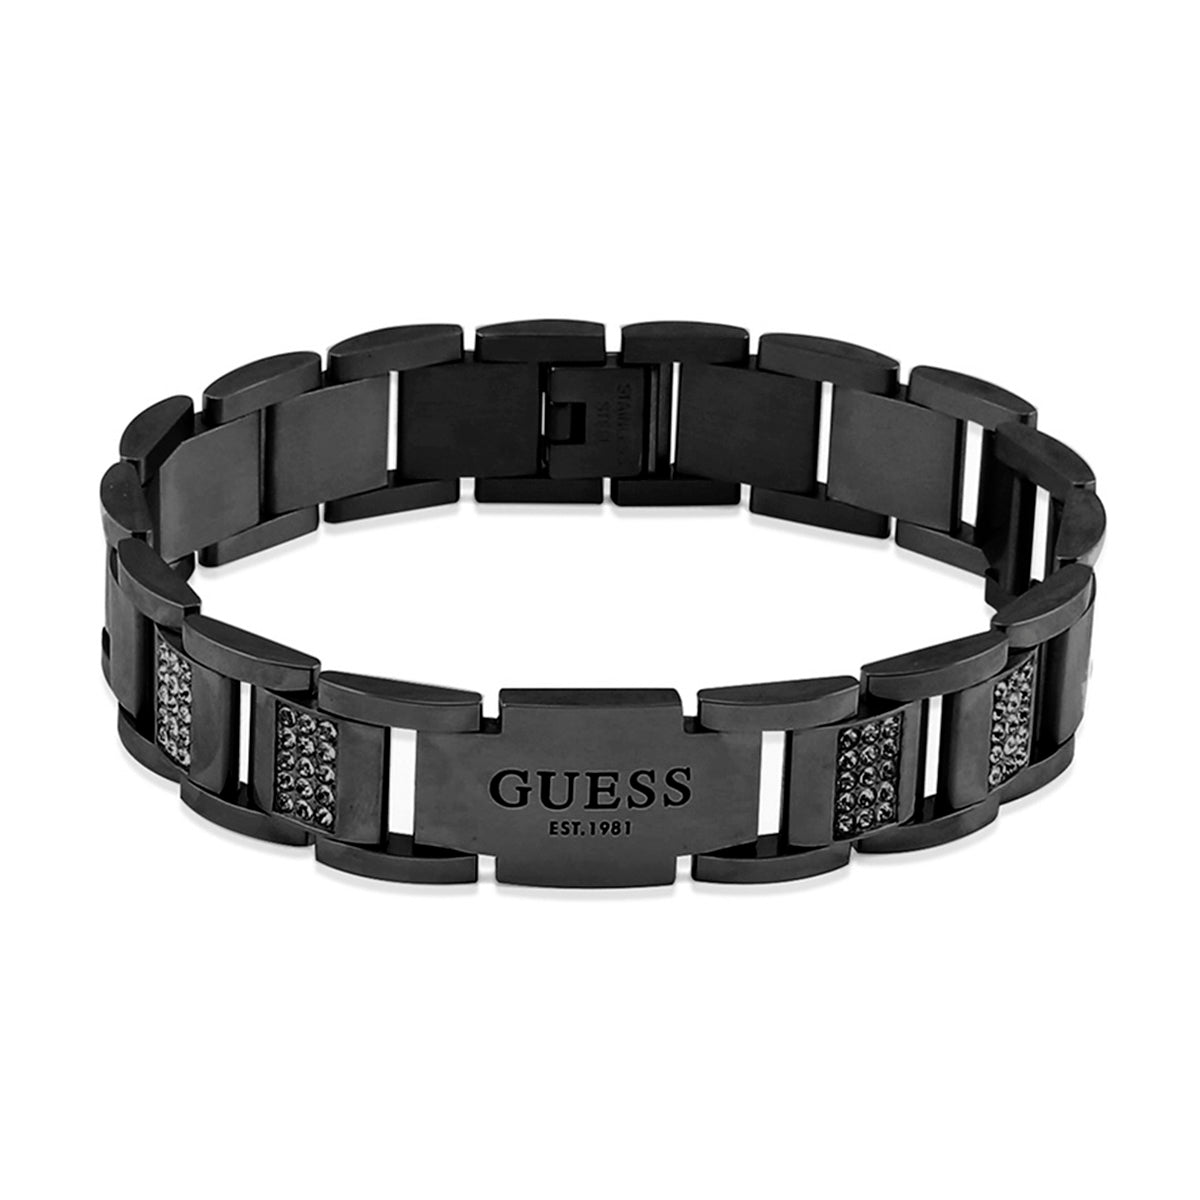 Brazalete Guess para Caballero  Frontiers color bronce